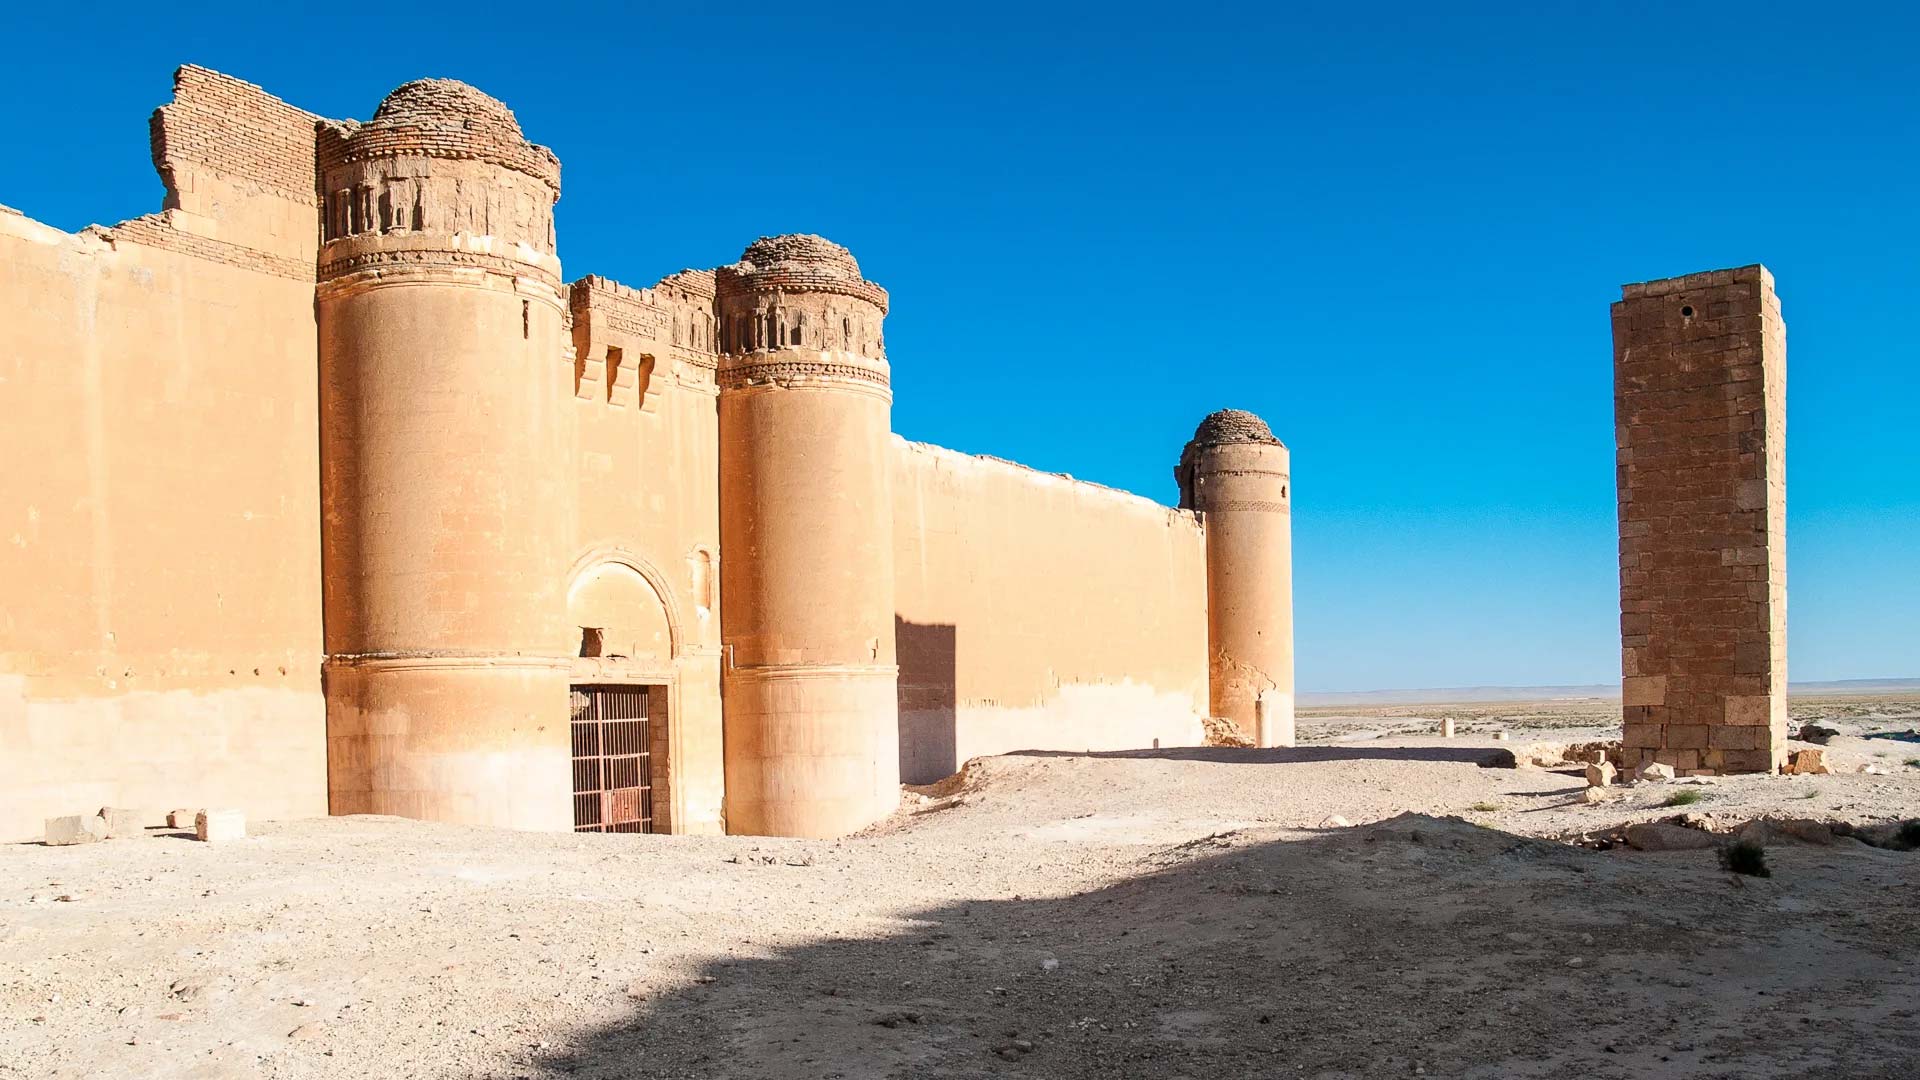 A photograph captures the imposing façade of Qasr Al Heir Al Sharqi, a castle situated in the heart of the expansive Syrian Desert, holding profound historical significance.